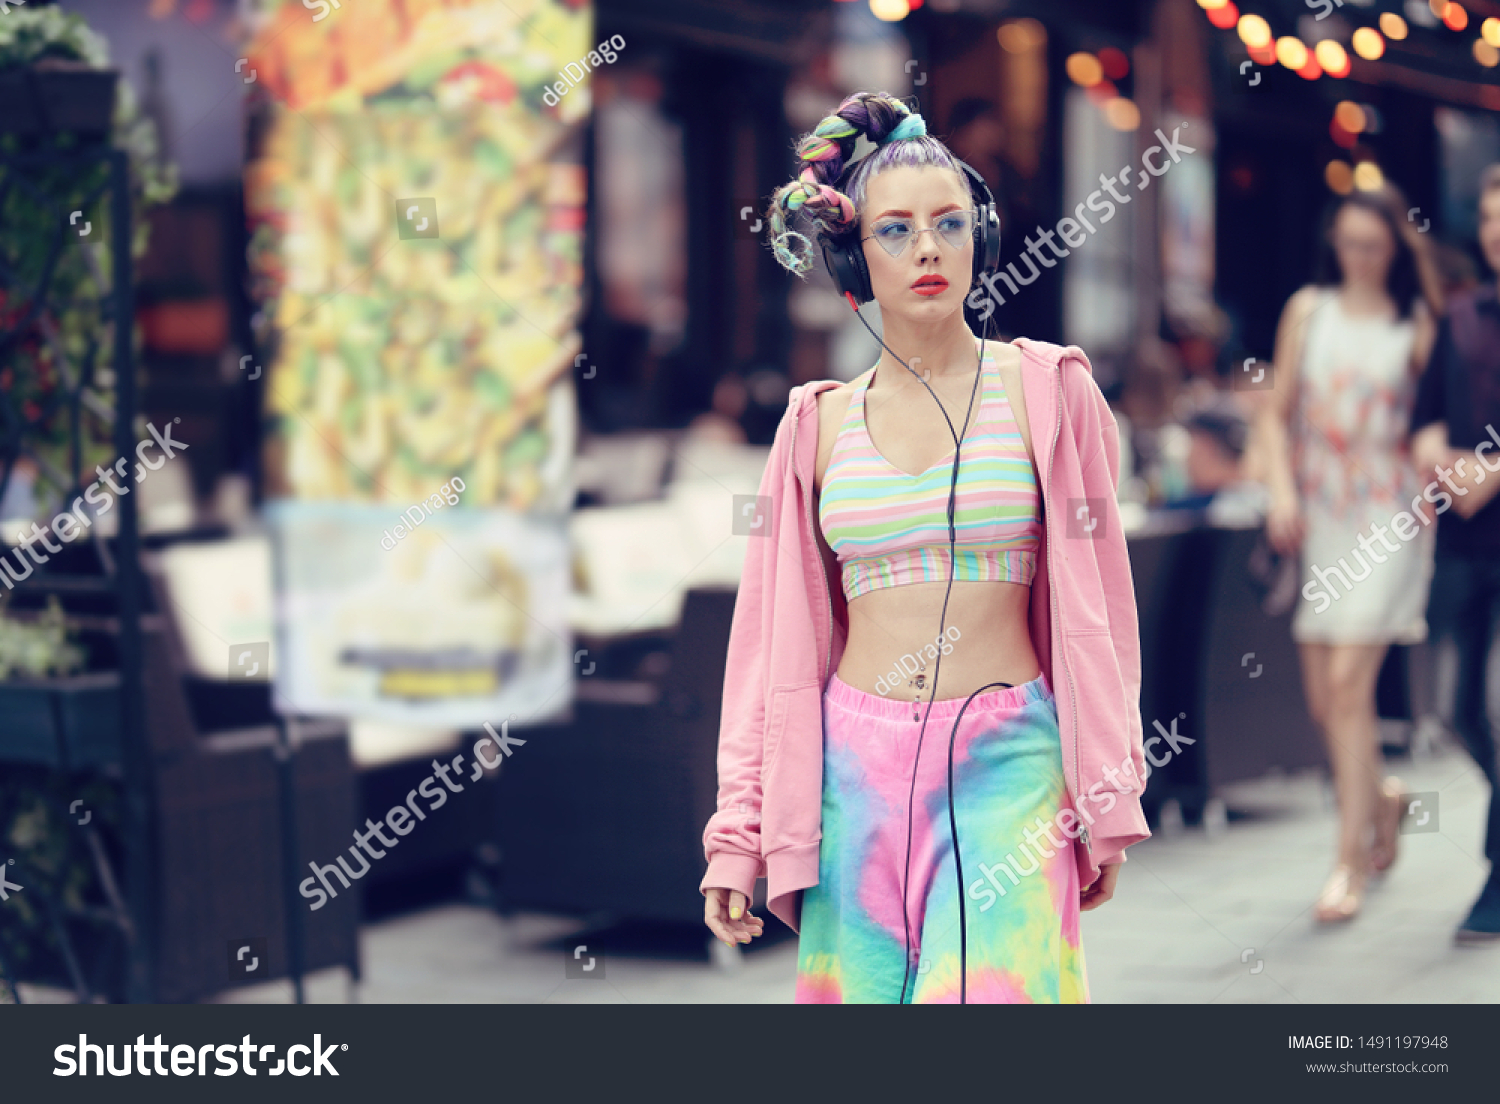 Modern fashion vanguard woman on the streets with trendy eyeglasses and piercings, listening music on headphones - Unique Avant-garde confident young woman - Urban fashion #1491197948